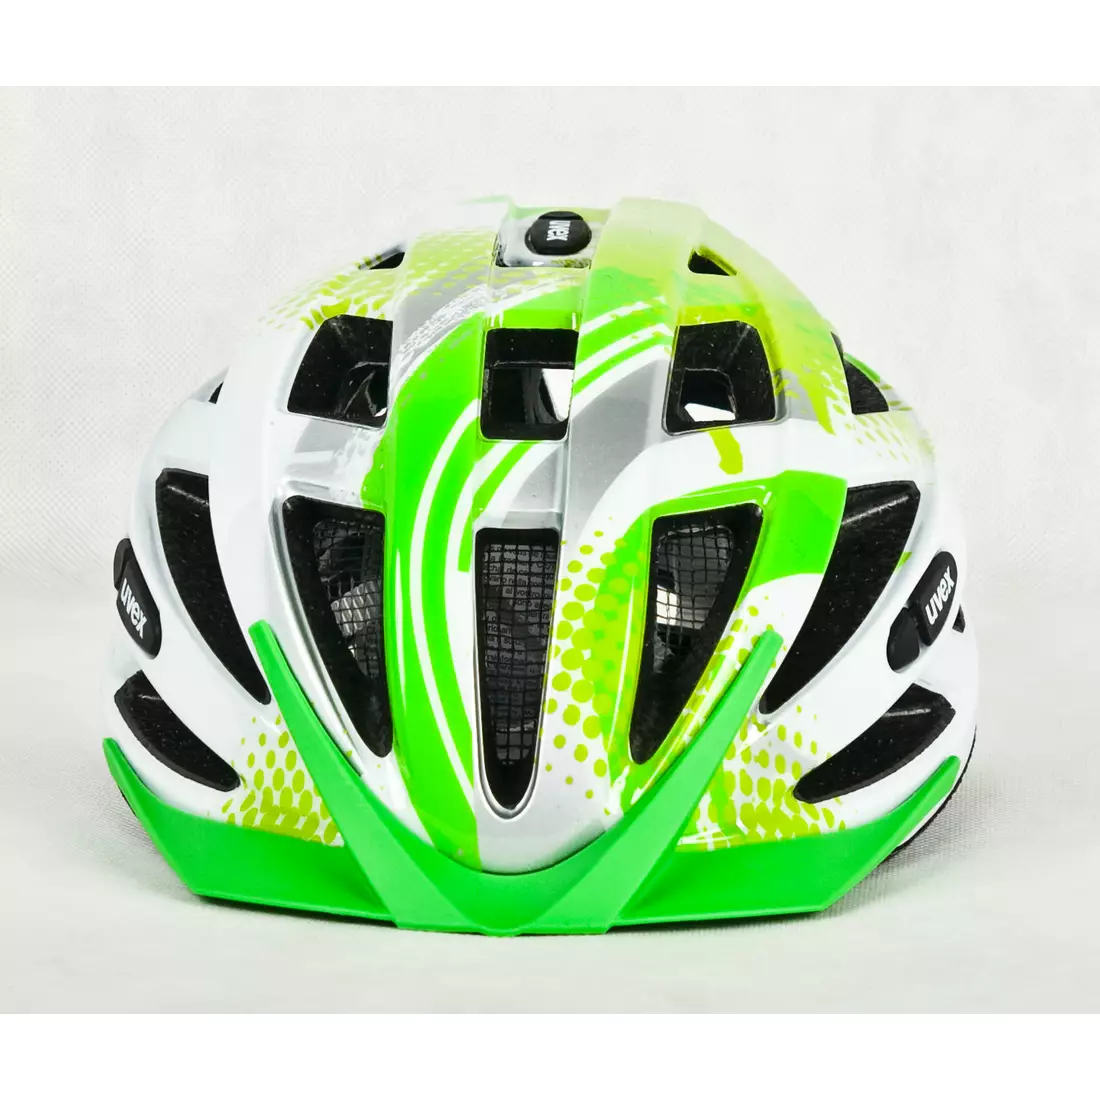 UVEX AIR WING bicycle helmet 41442614 lime and white